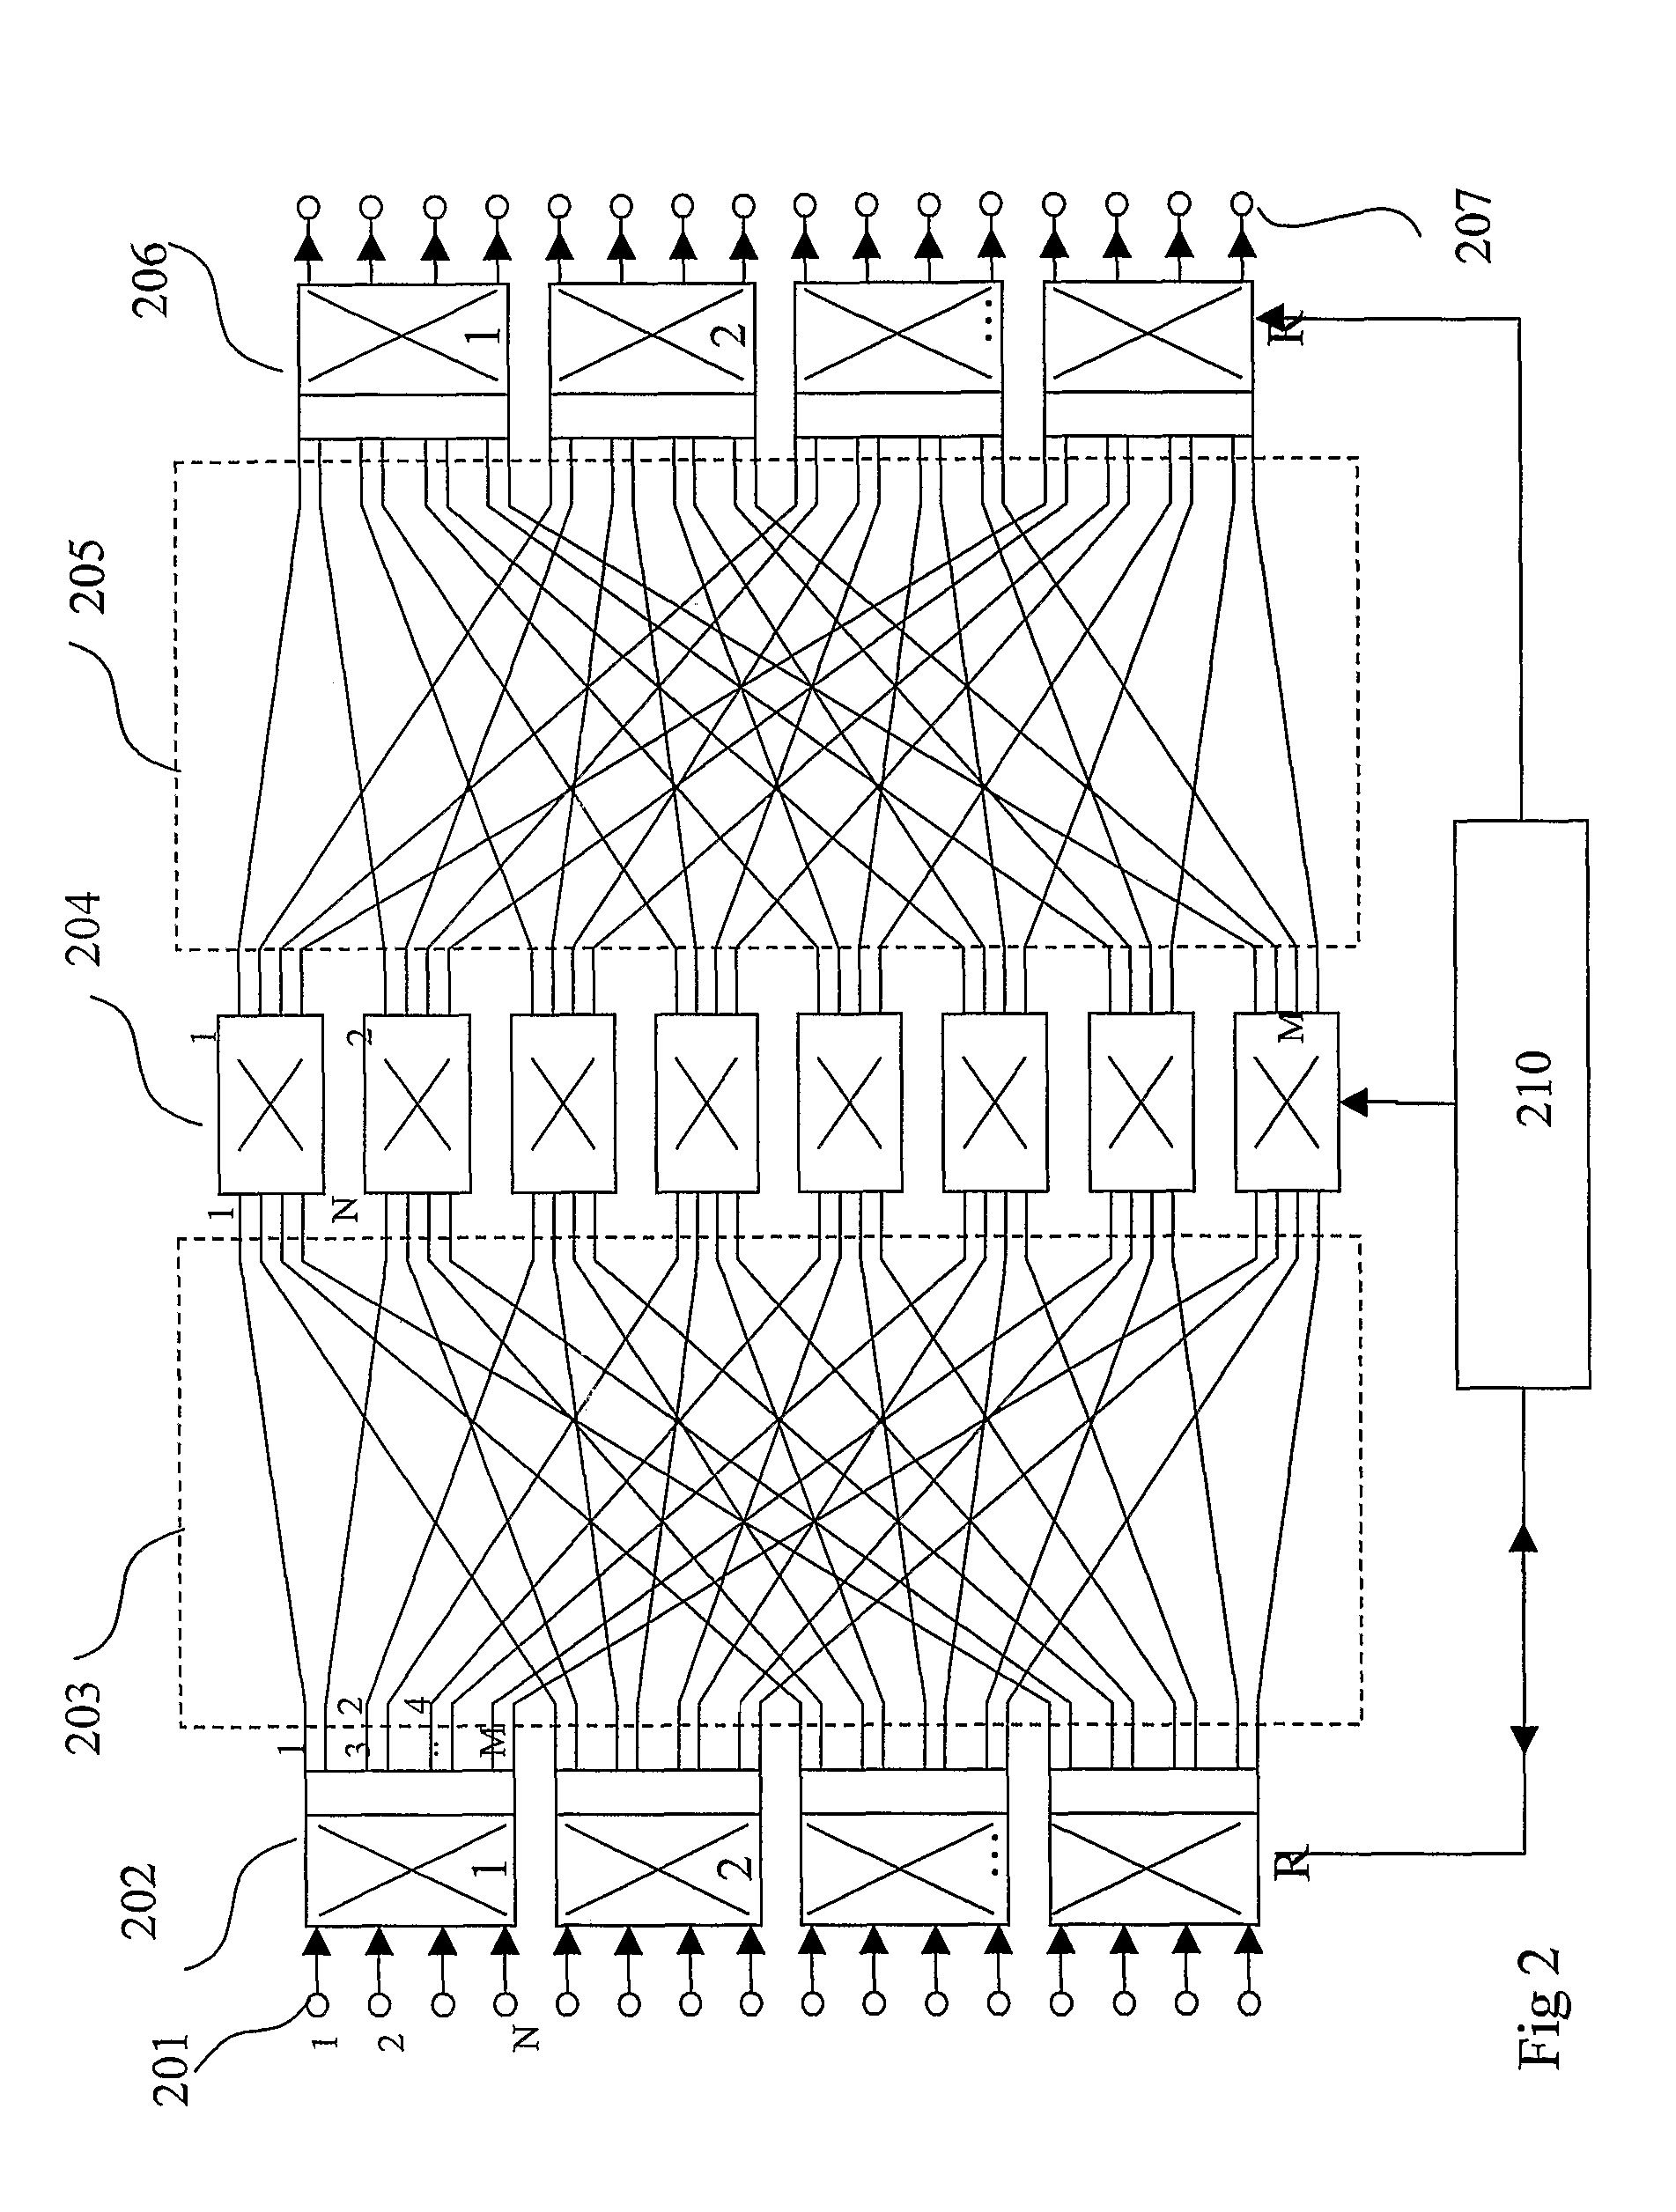 Compact load balanced switching structures for packet based communication networks